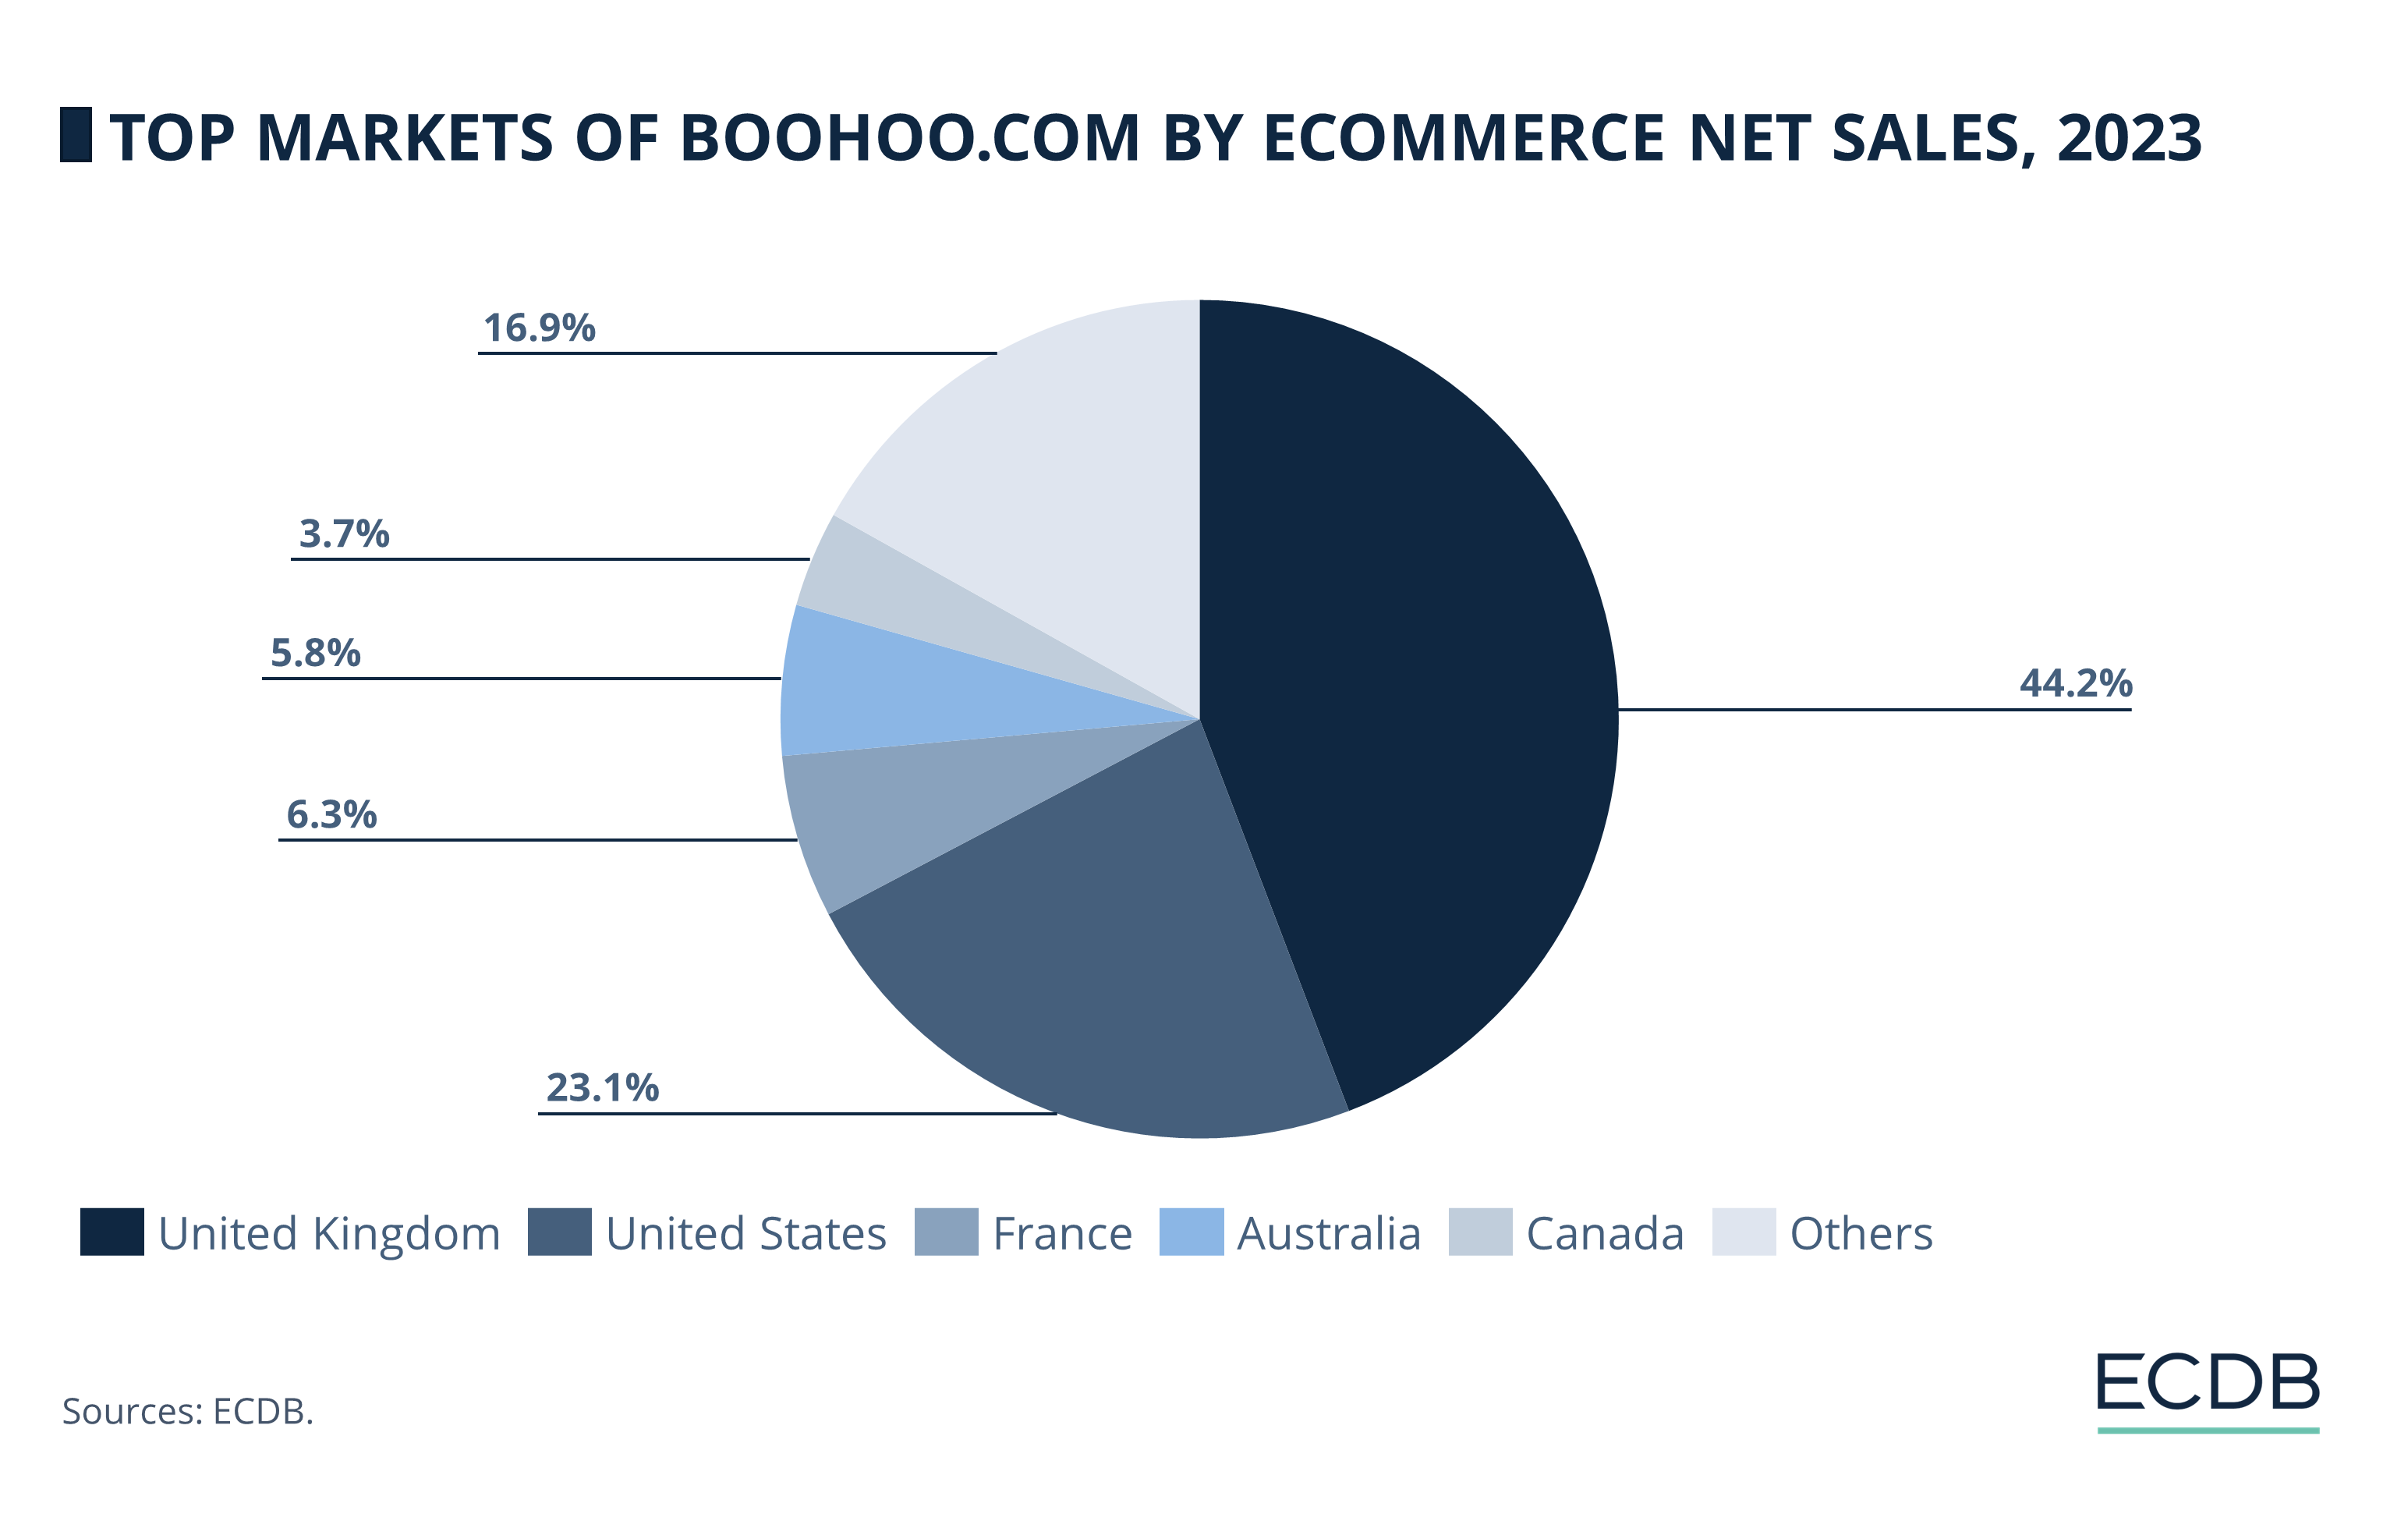 Top Markets of Boohoo.com by eCommerce Net Sales